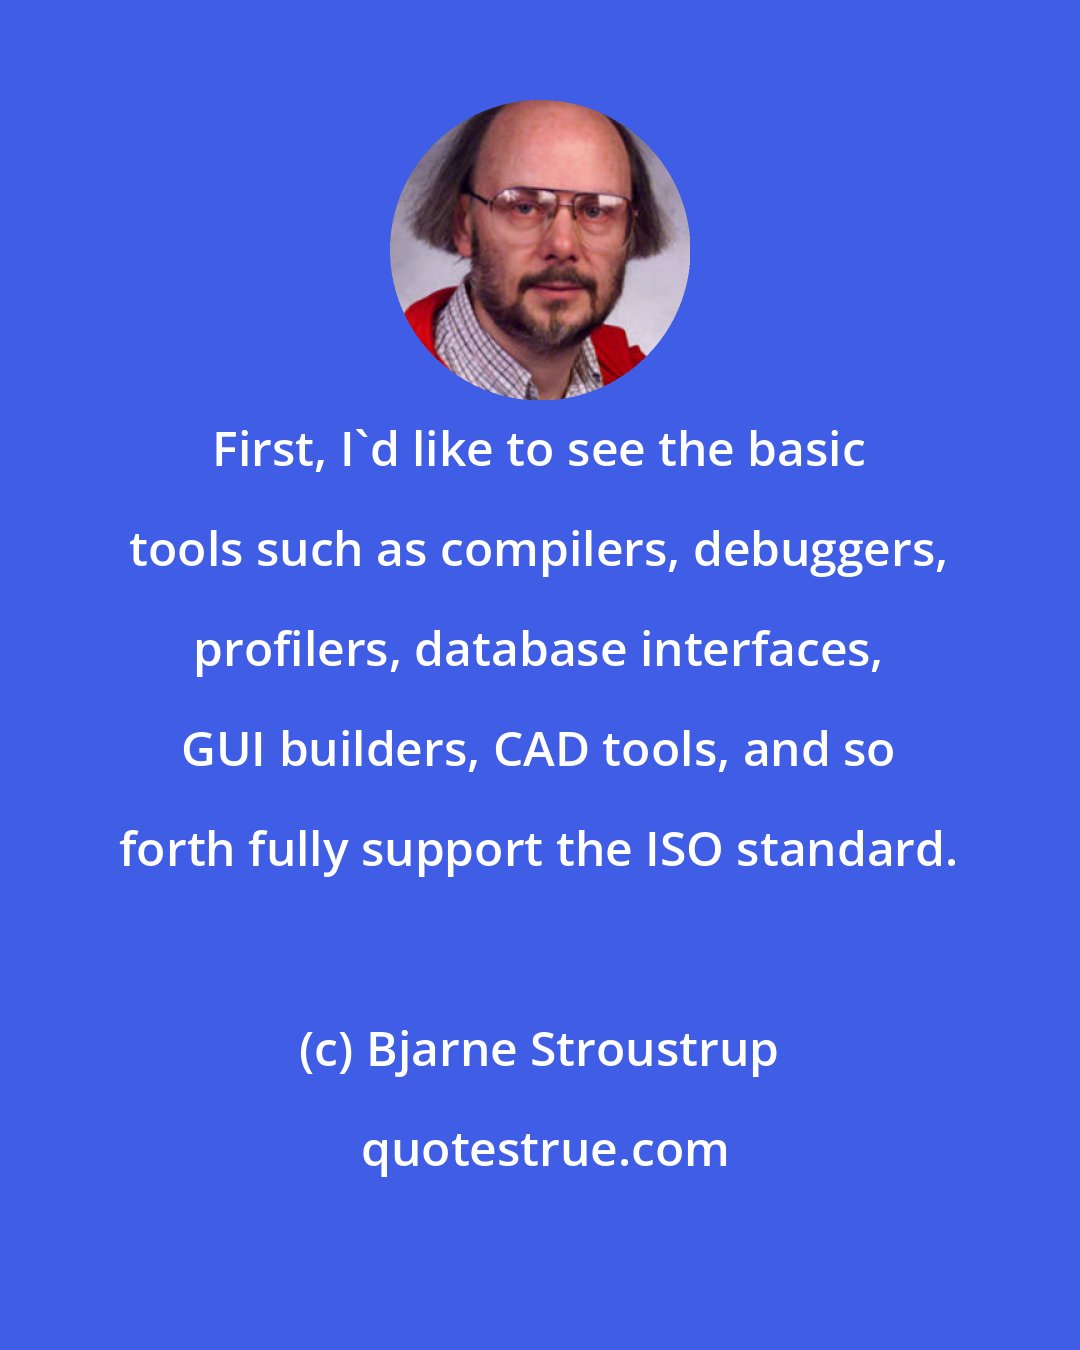 Bjarne Stroustrup: First, I'd like to see the basic tools such as compilers, debuggers, profilers, database interfaces, GUI builders, CAD tools, and so forth fully support the ISO standard.